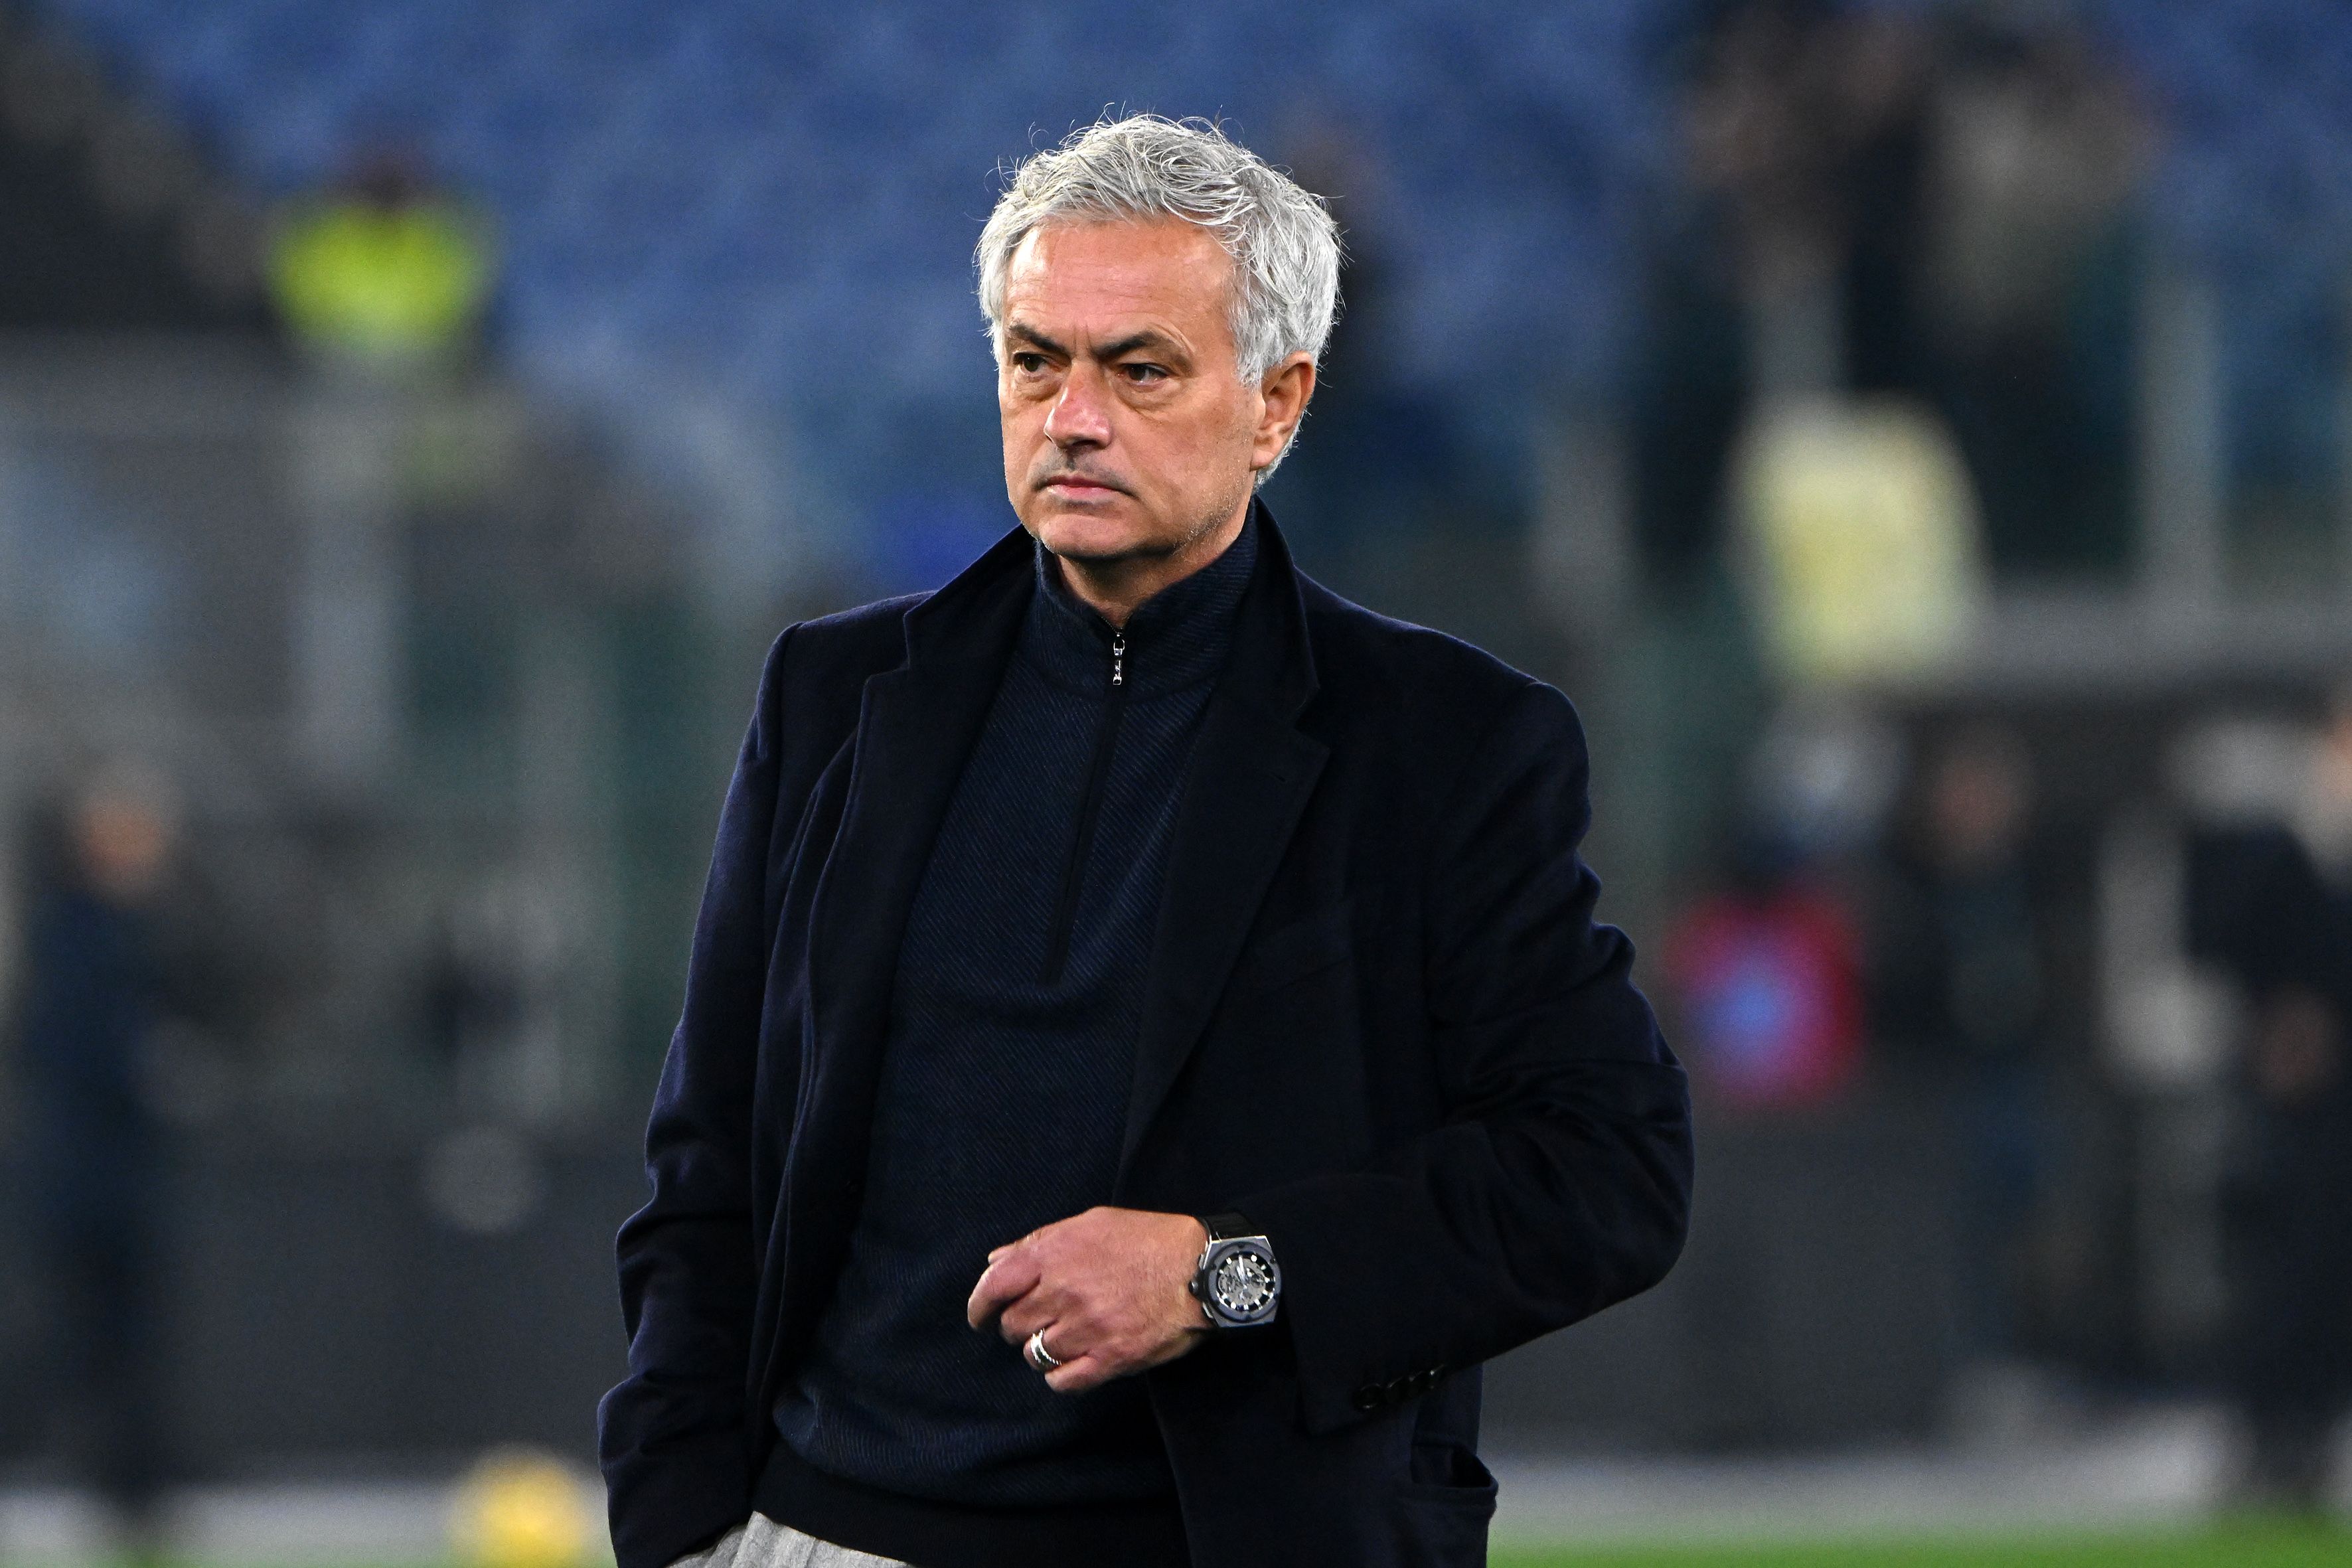 Jose Mourinho was sacked by Roma yesterday